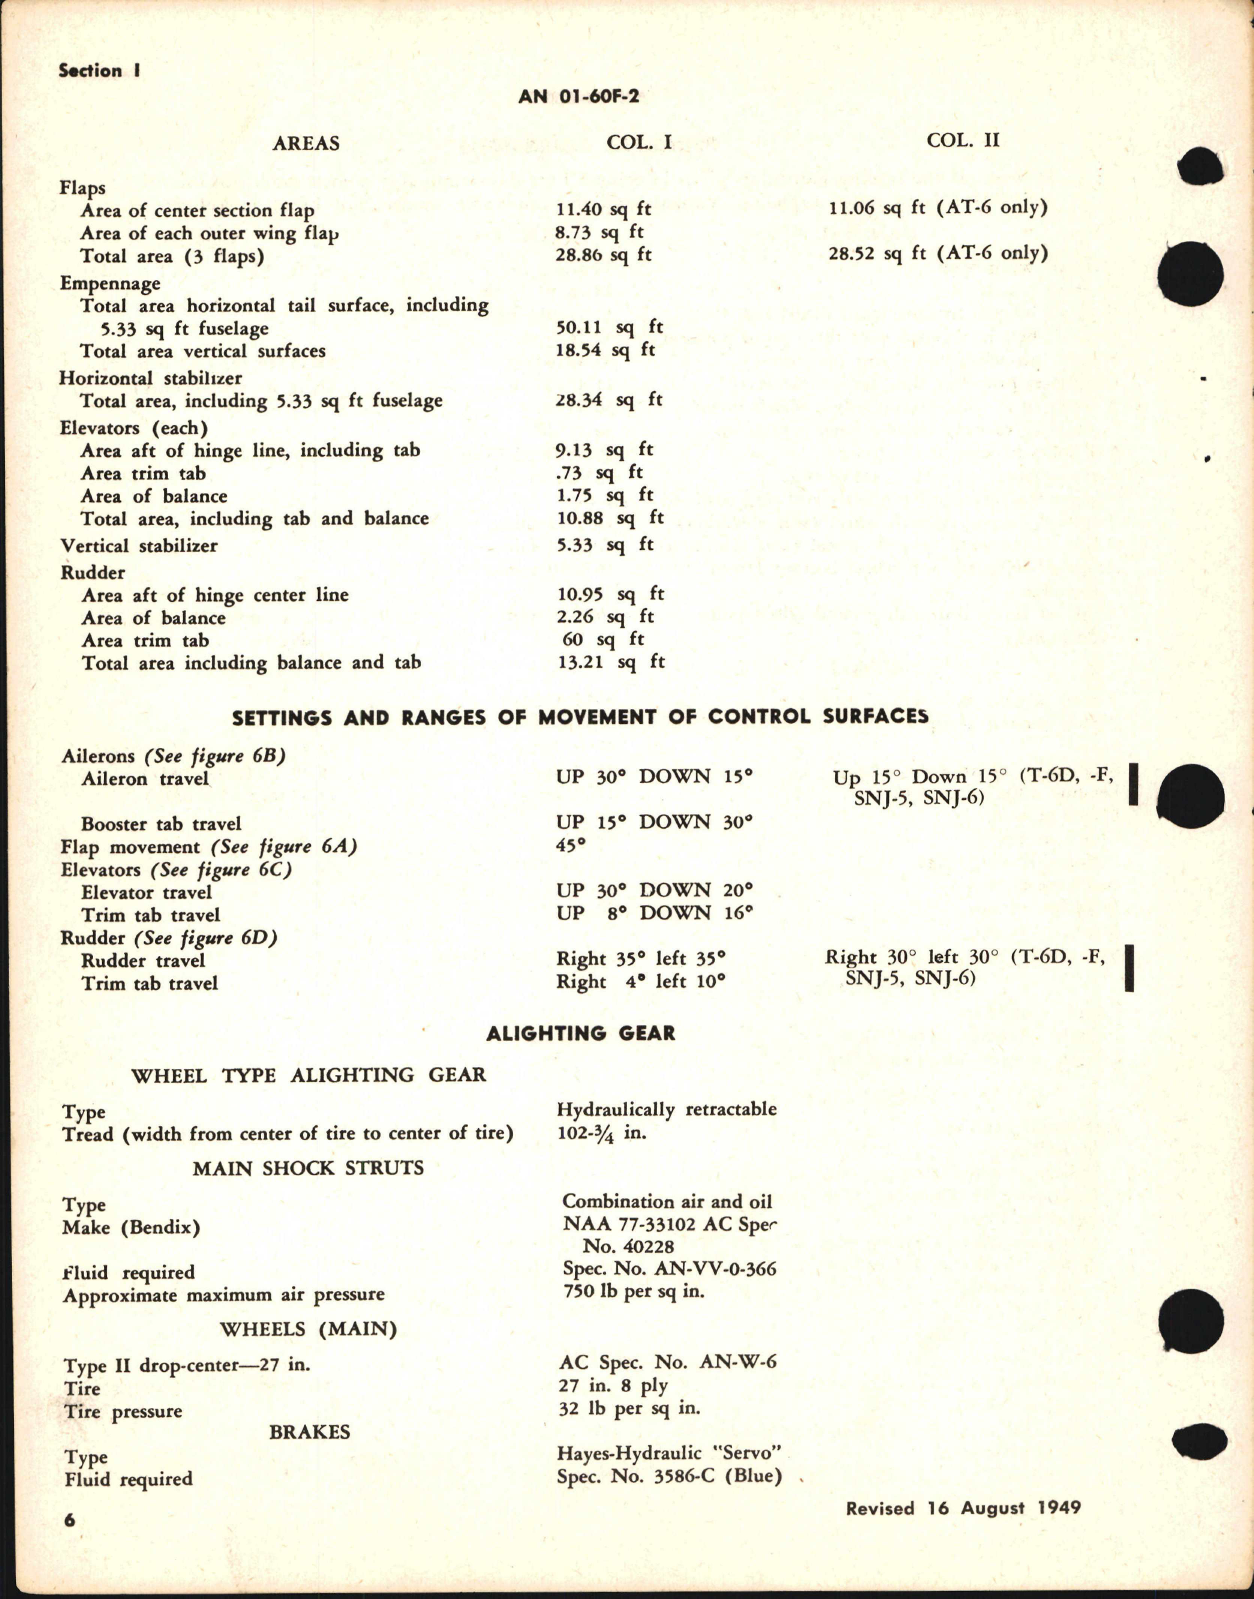 Sample page 6 from AirCorps Library document: Erection and Maintenance Instructions for T-6D, T-6F, SNJ-5, and SNJ-6